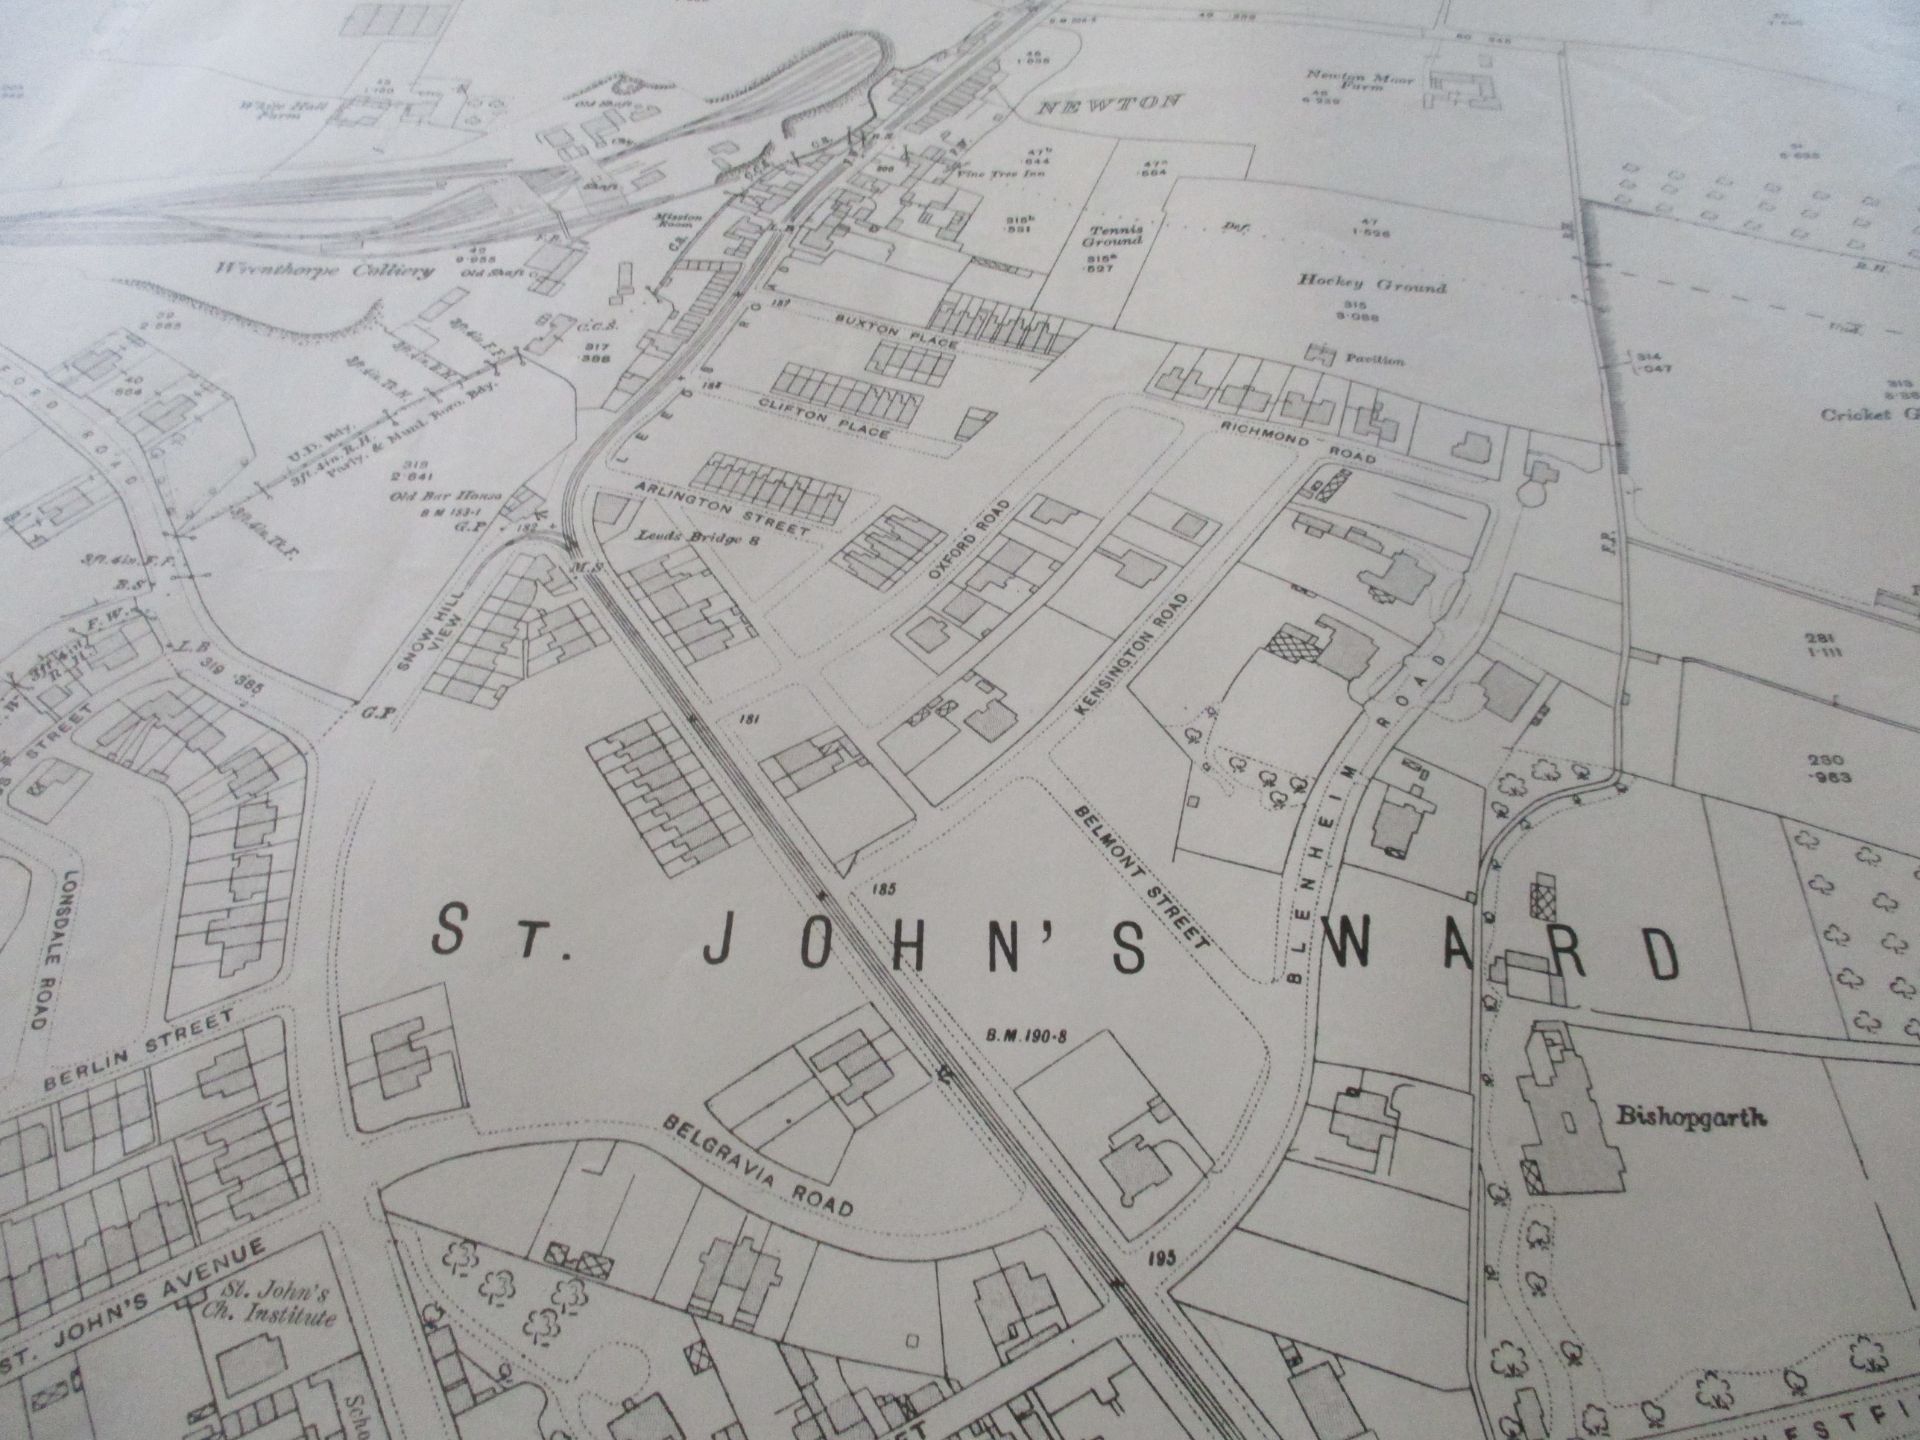 9 x ordnance survey maps relating to the Wakefield area scale 1/1250 each 74 x 104cm published by - Image 14 of 17